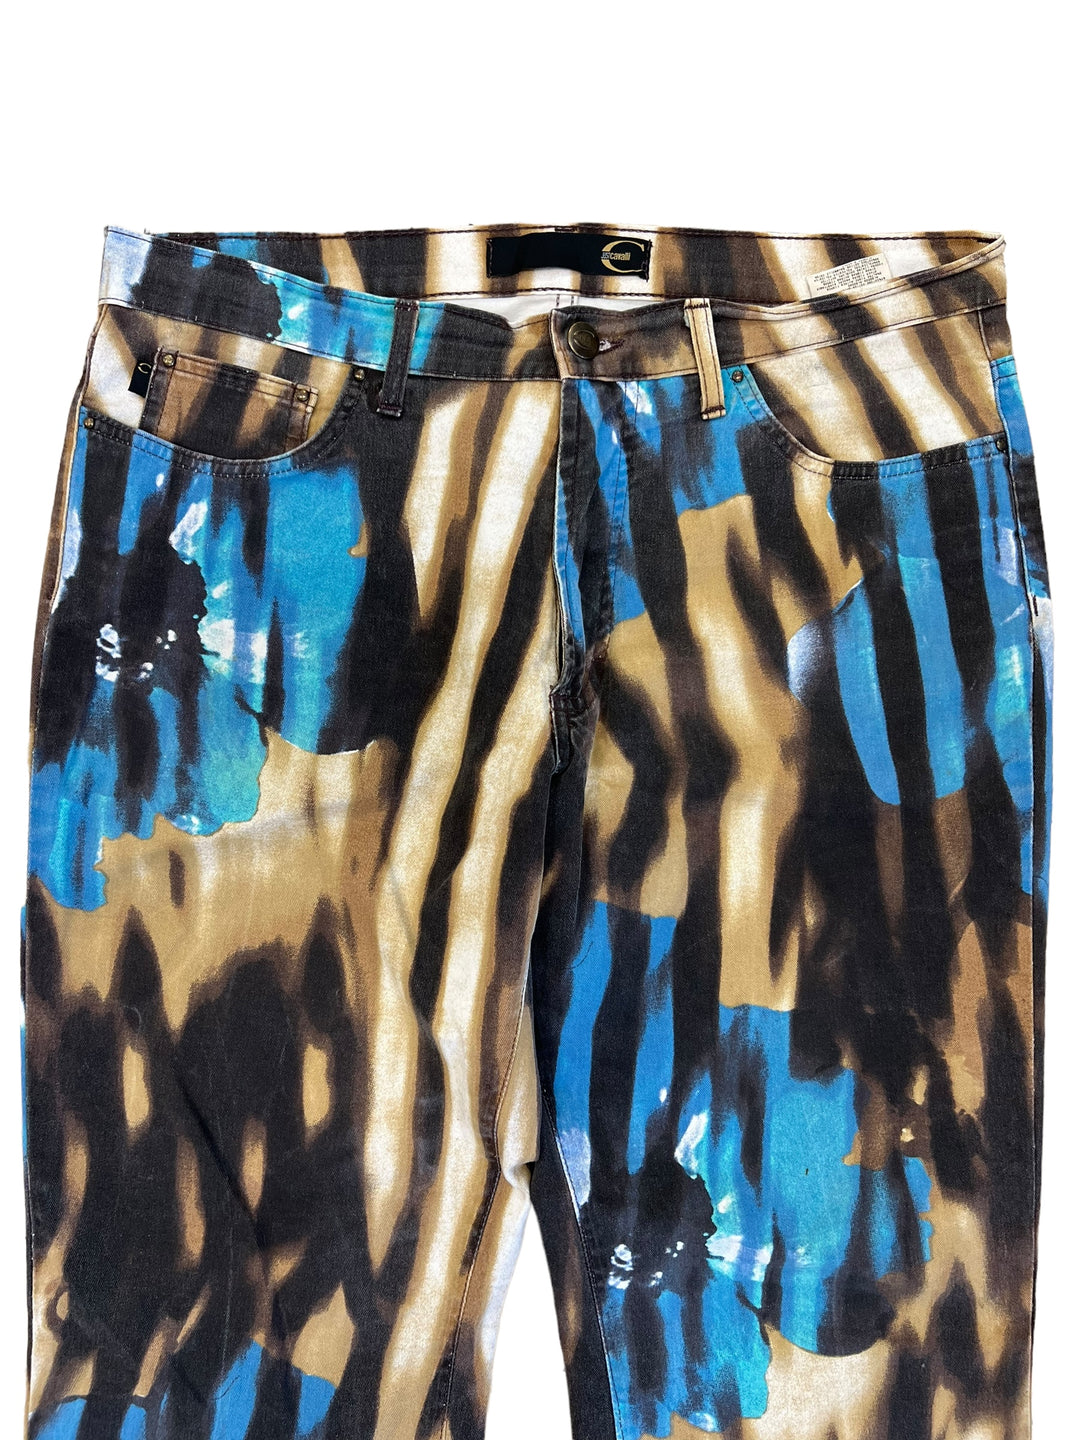 Just Cavalli SS 2002 low waist all over print jeans Women's large(42) *short down * check the dimensions